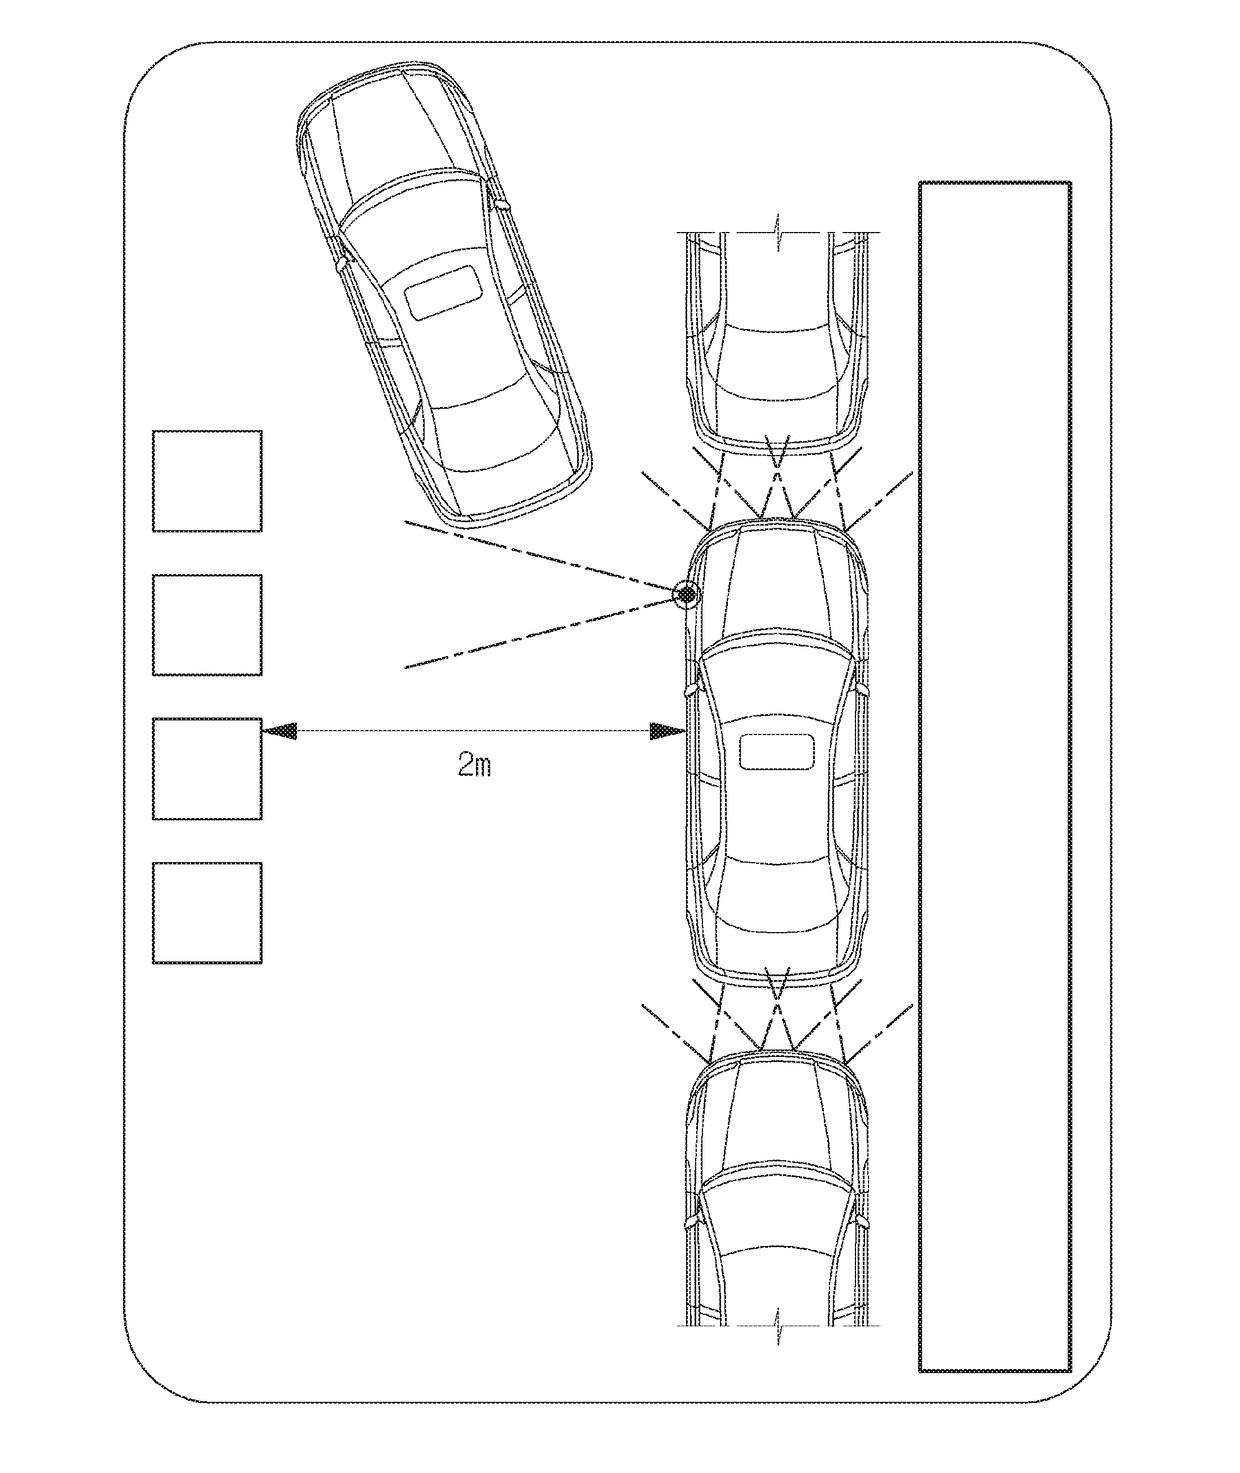 Smart parking assist system and method